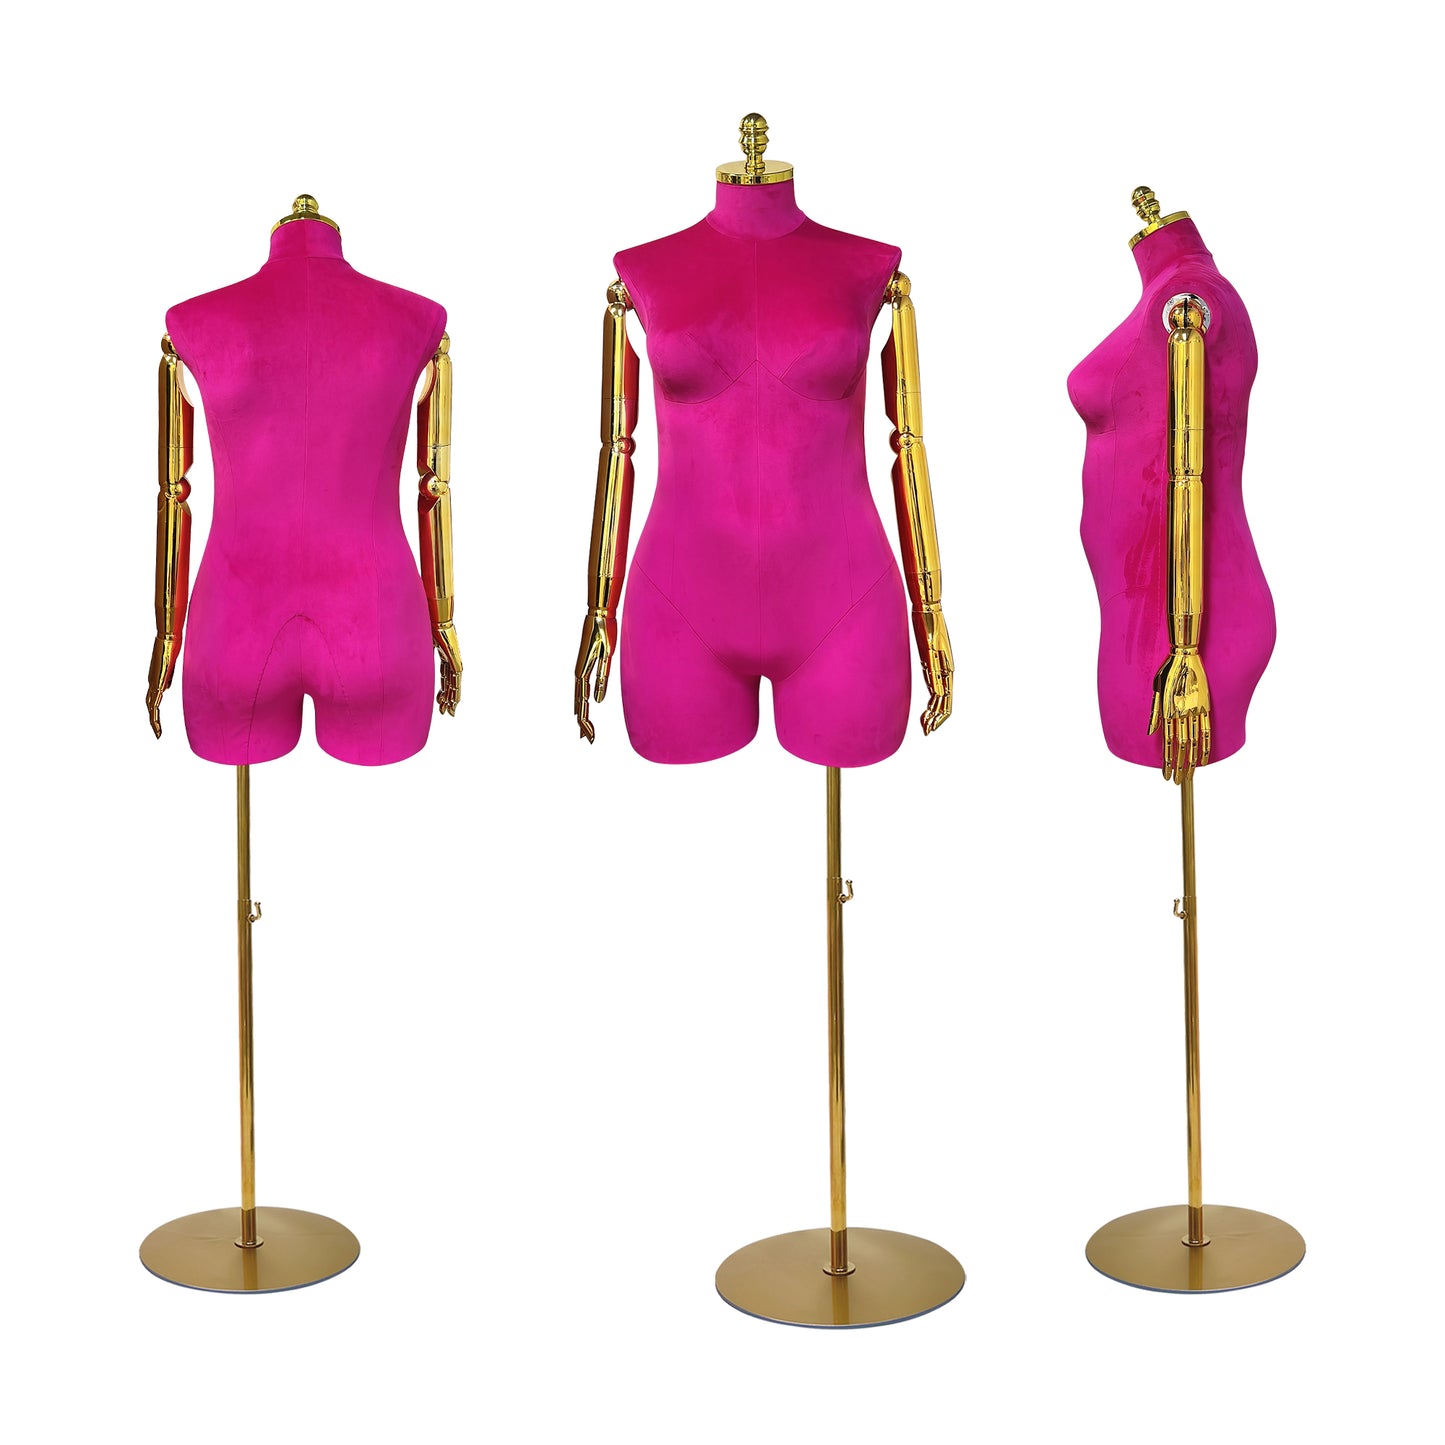 JM375 Adult Female Plus Size Mannequin Torso Display Dummy,Luxury Colorful Velvet Dress Form for Clothing Display,Wig Head Manikin Gold Arms